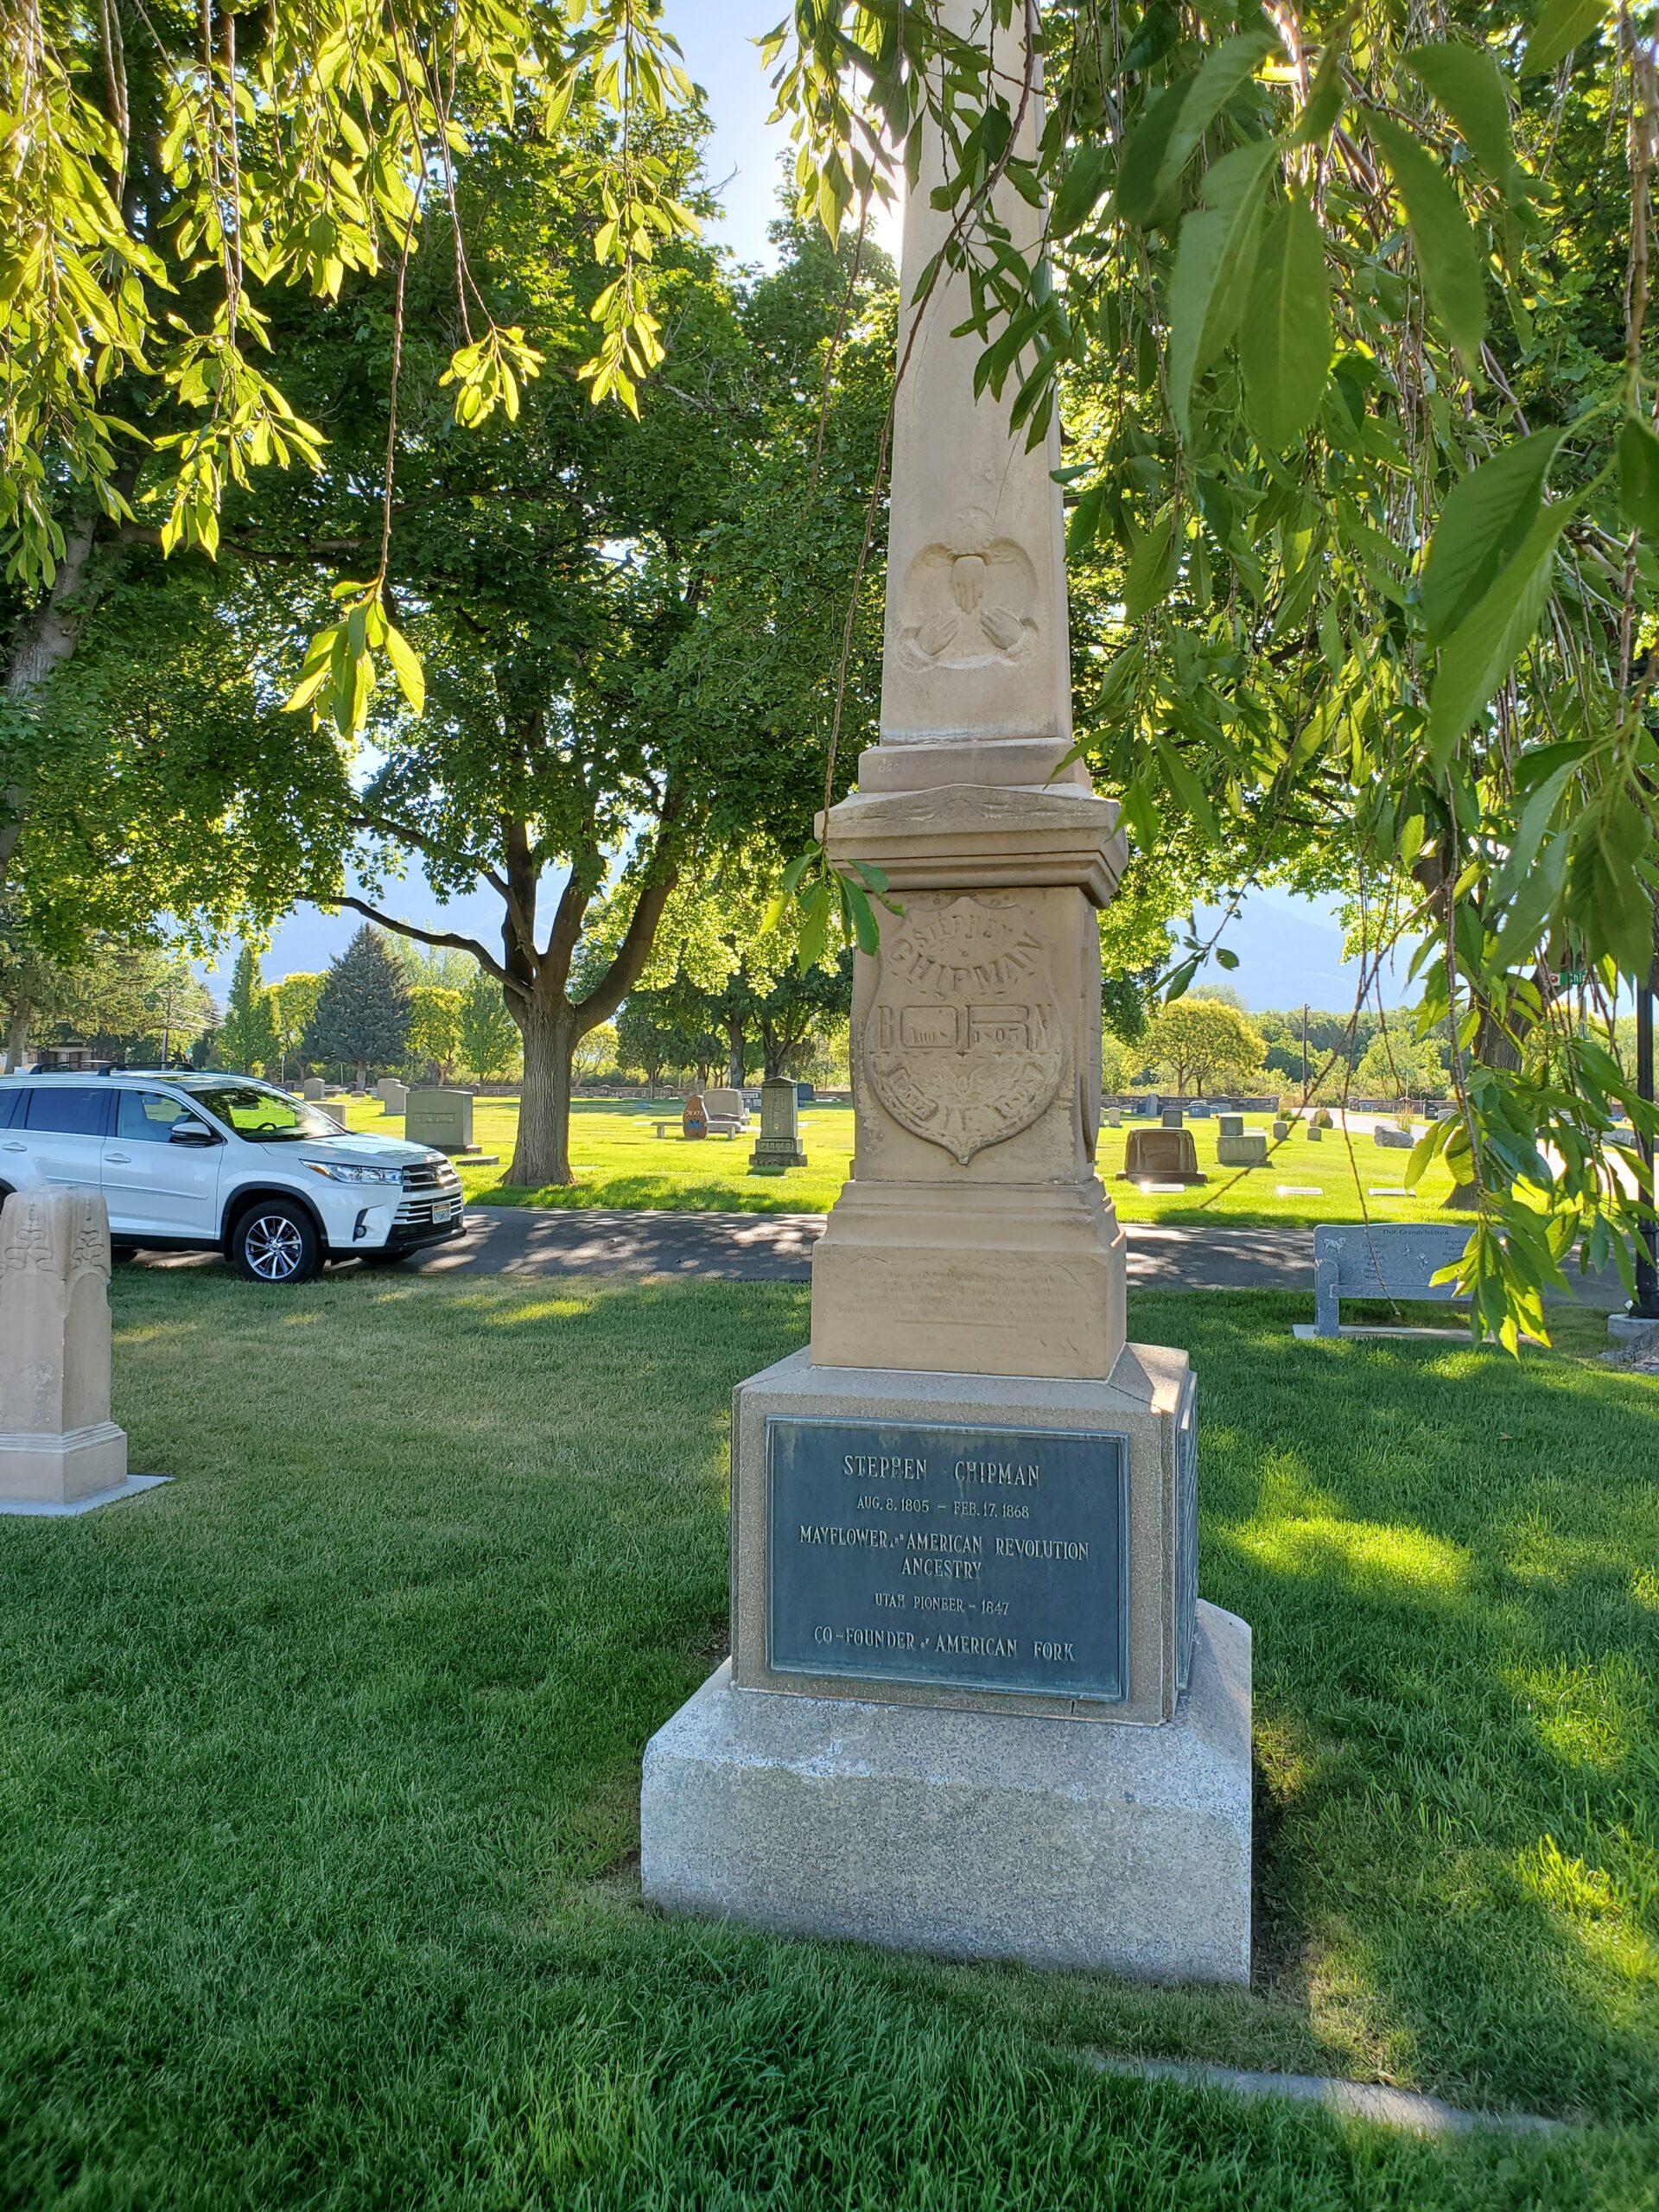 Another side of the Chipman Monument